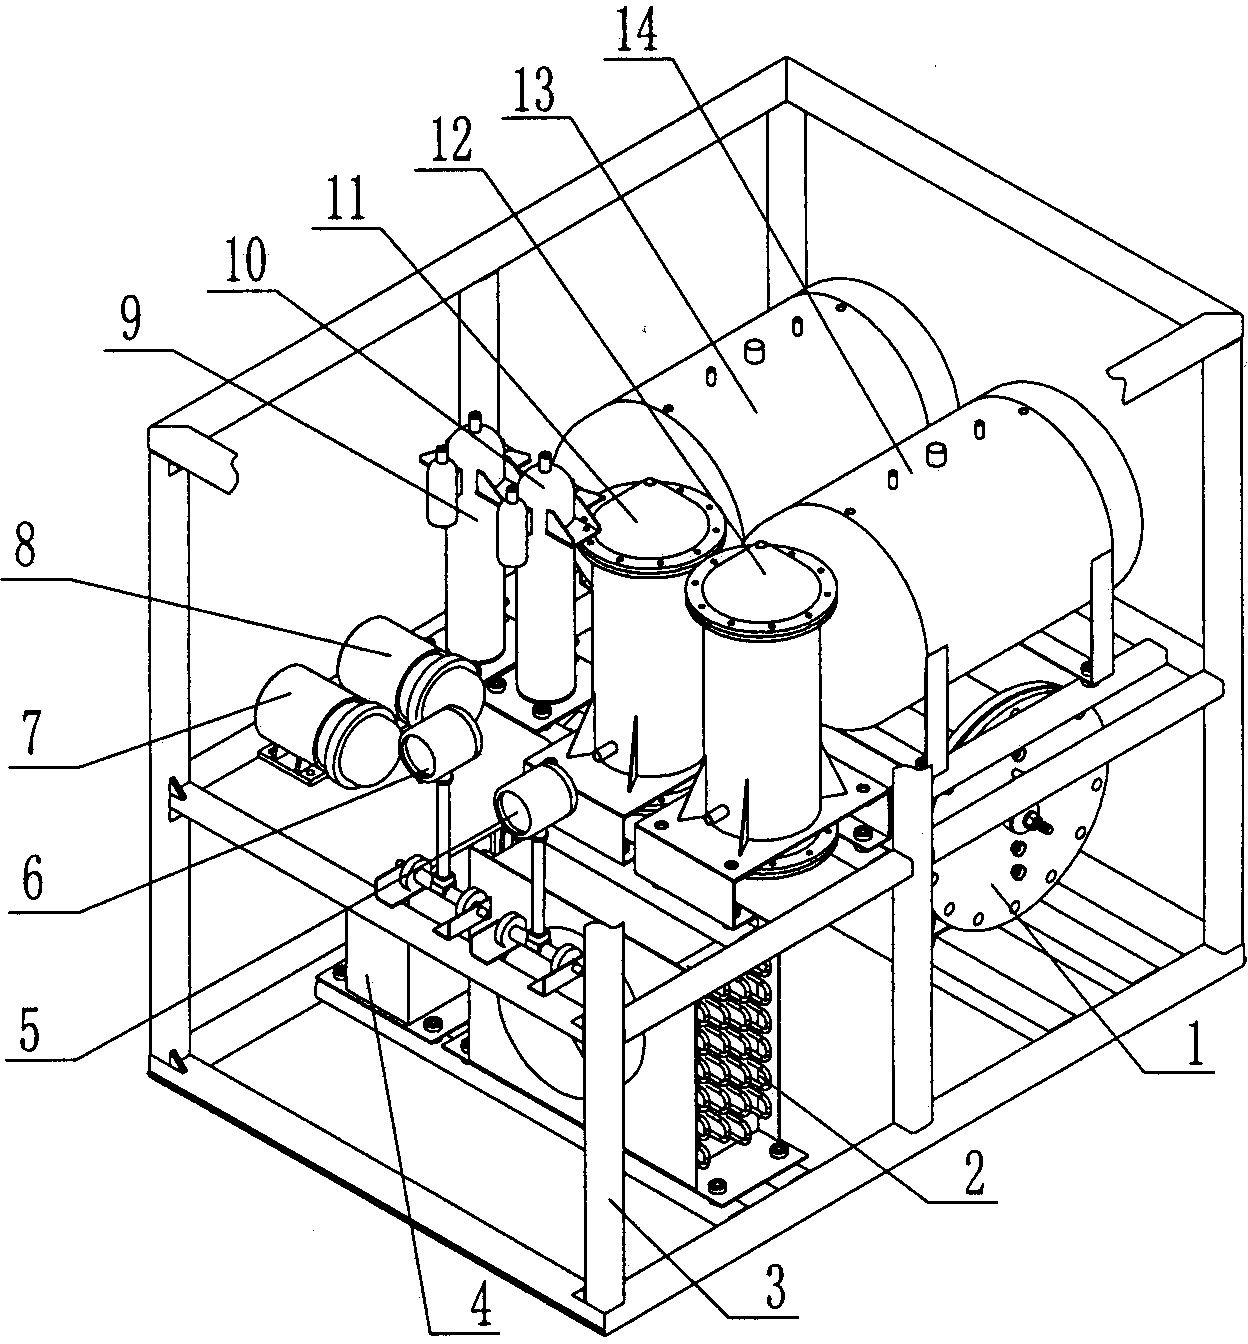 Oxy-hydrogen mixed gas integrated generating device